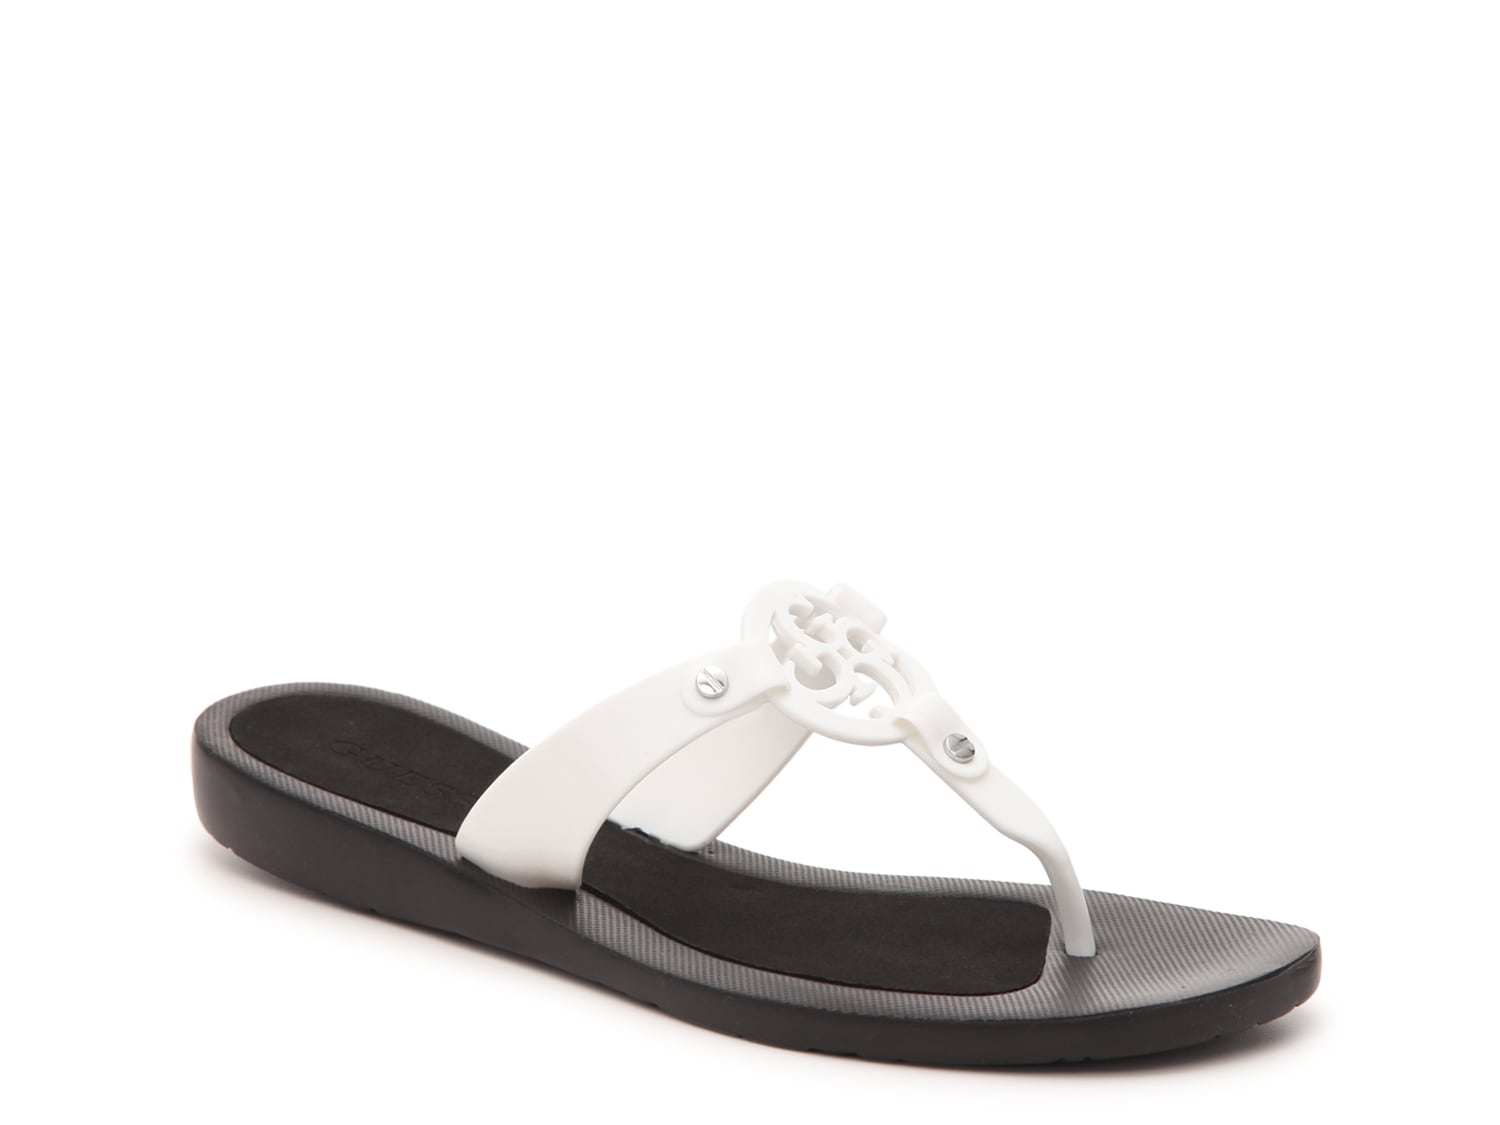 Guess Tyana Flip Flop - Free Shipping | DSW